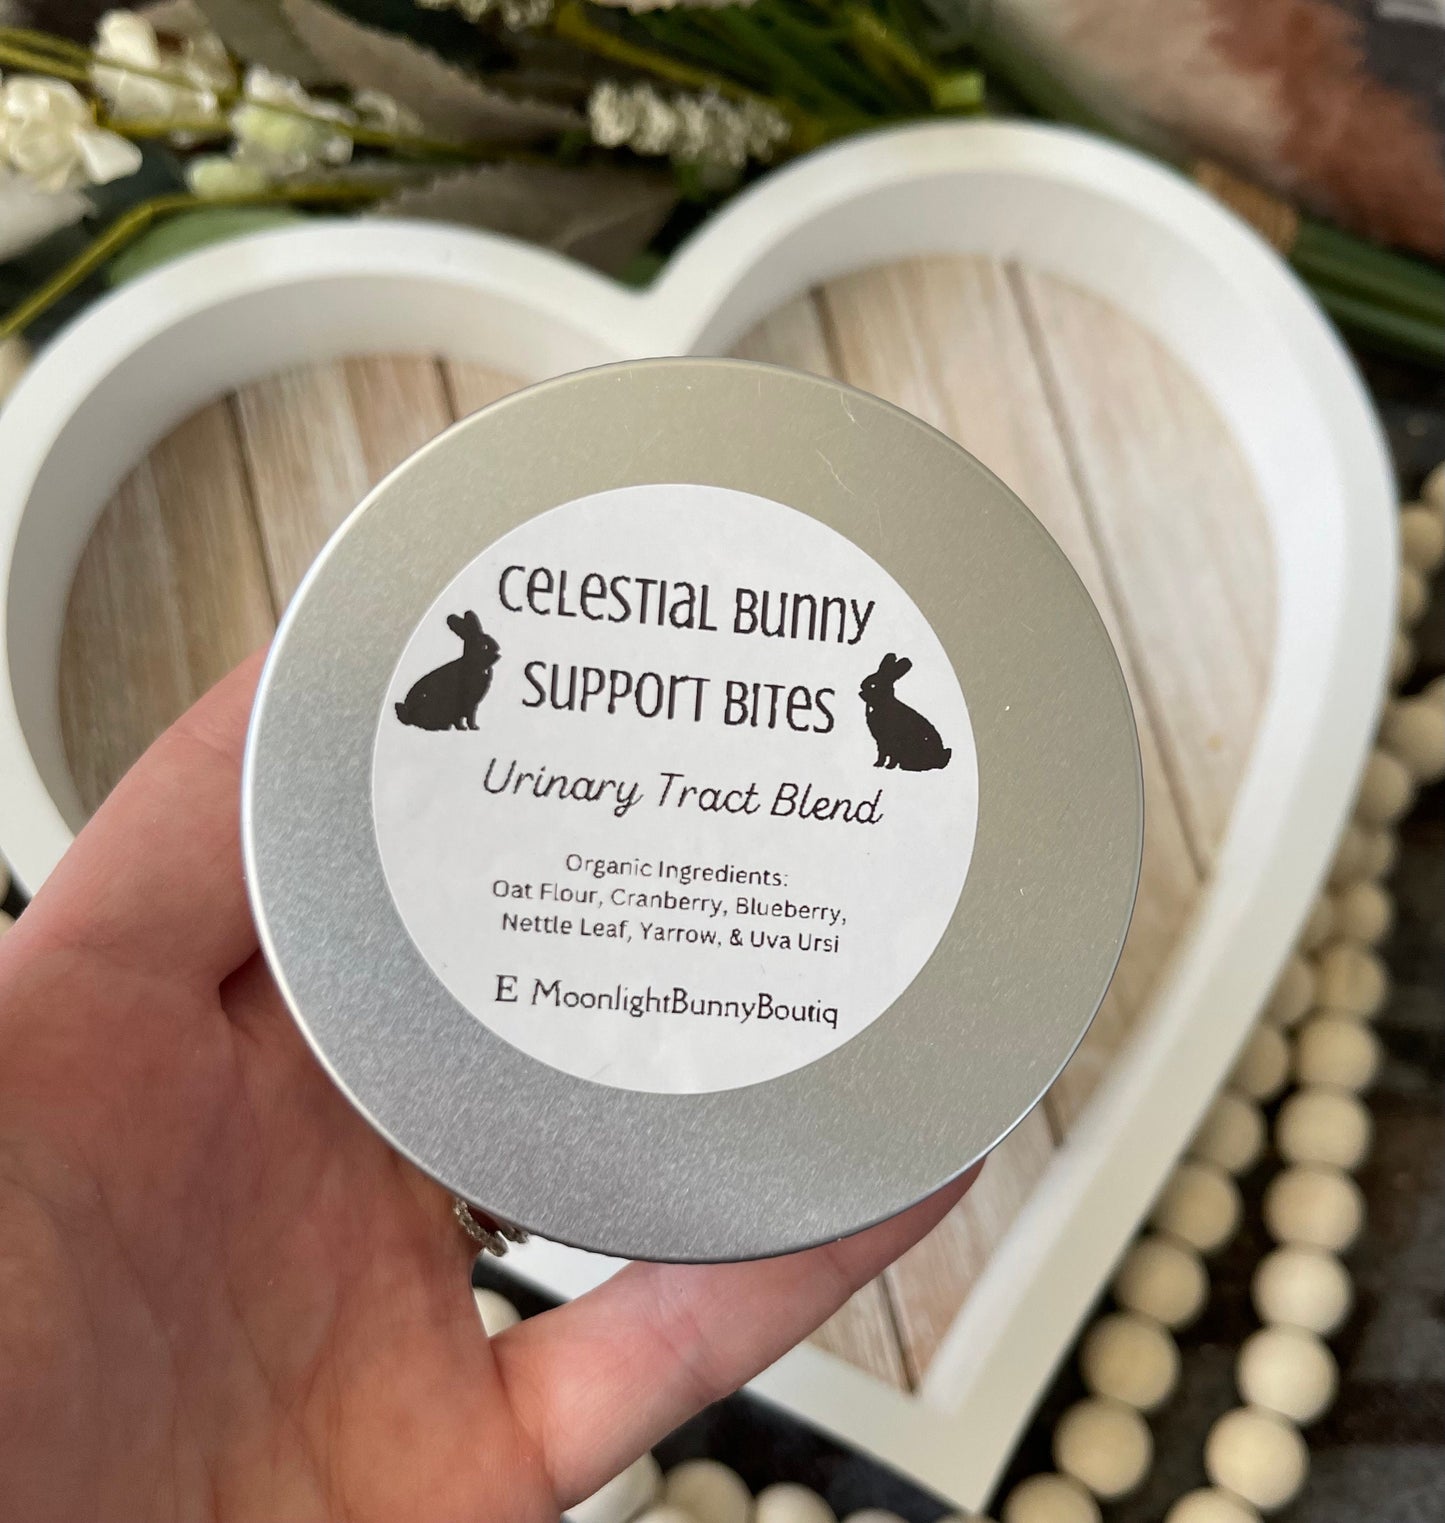 Celestial Bunny Support Bites~ Urinary Blend~bite sized supportive health treat formulated for healthy GU tract, bladder & kidney function